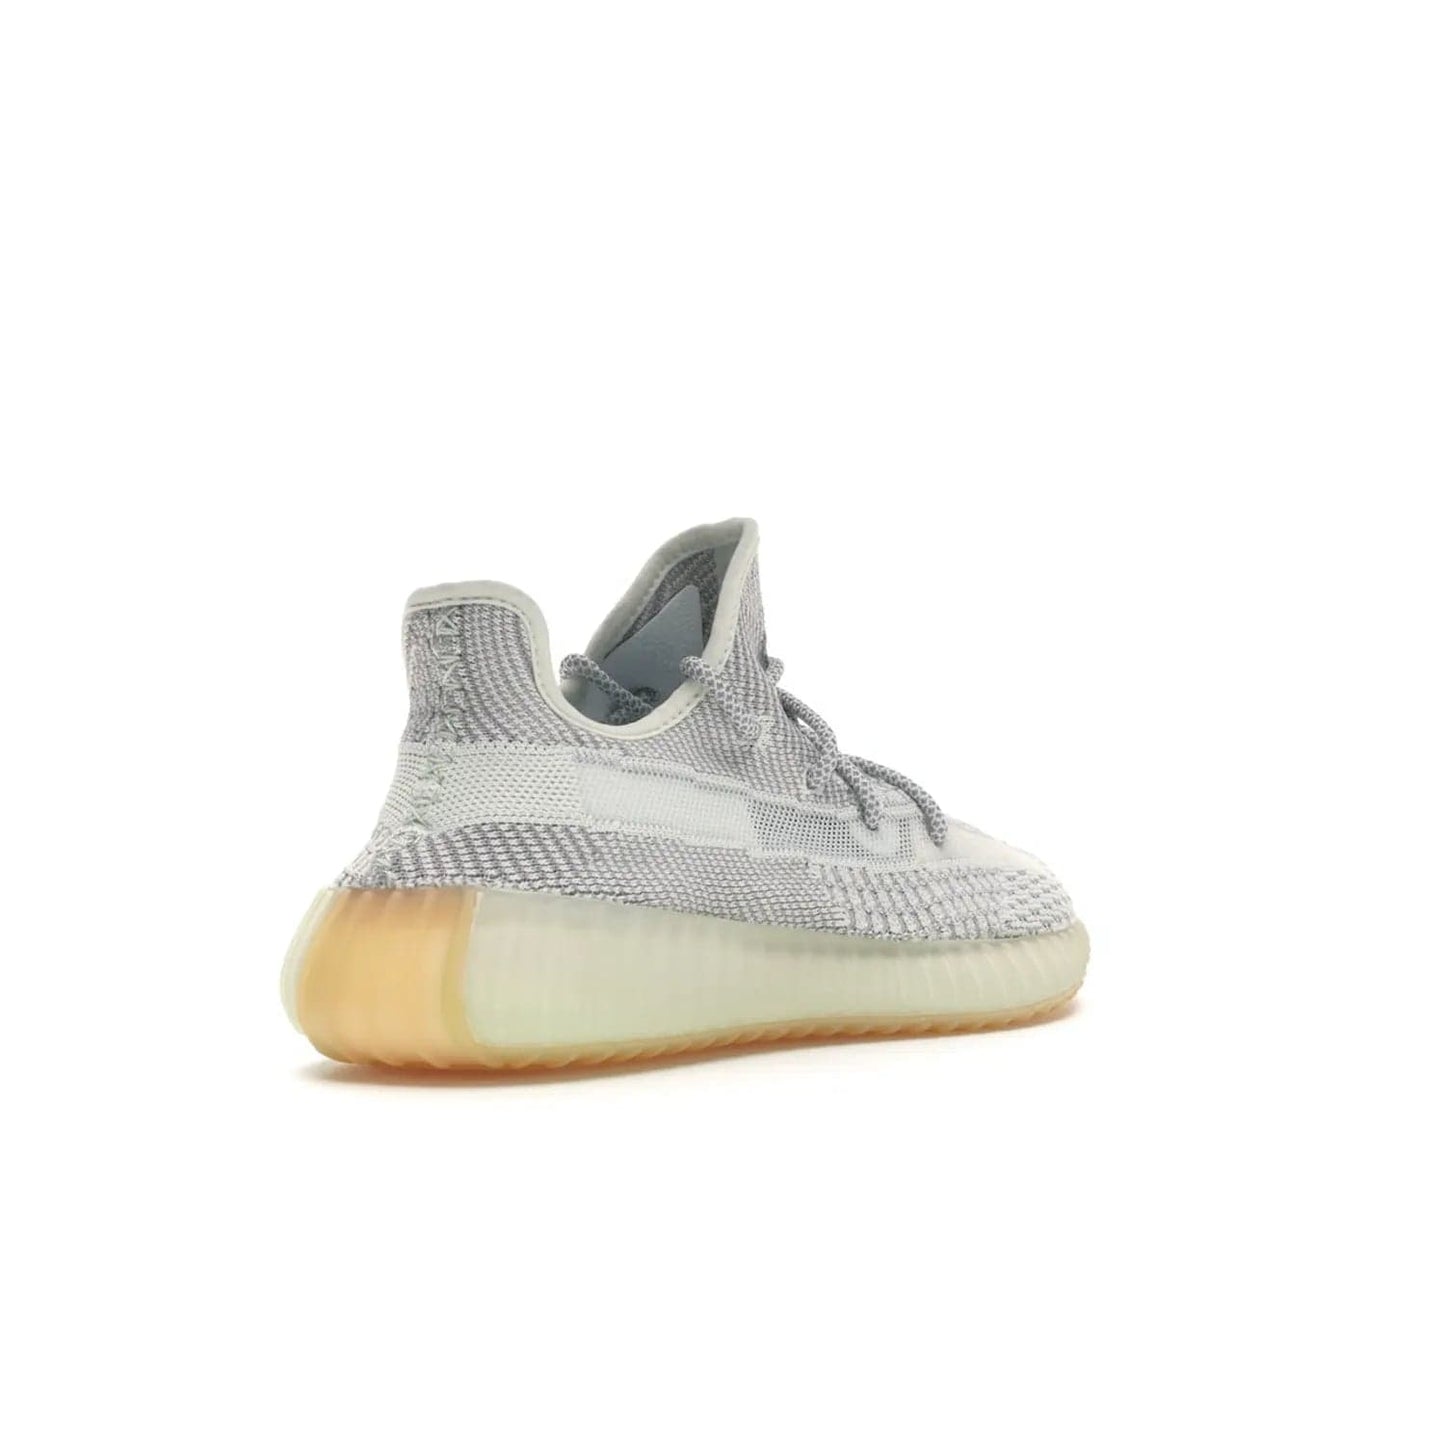 adidas Yeezy Boost 350 V2 Yeshaya (Non-Reflective) - Image 32 - Only at www.BallersClubKickz.com - Step out in style with the adidas Yeezy Boost 350 V2 Yeshaya (Non-Reflective). Gray-and-white Primeknit upper with mesh side stripe & rope laces, plus a translucent Boost sole with a hint of yellow. Make a statement and feel comfortable with this stylish sneaker.